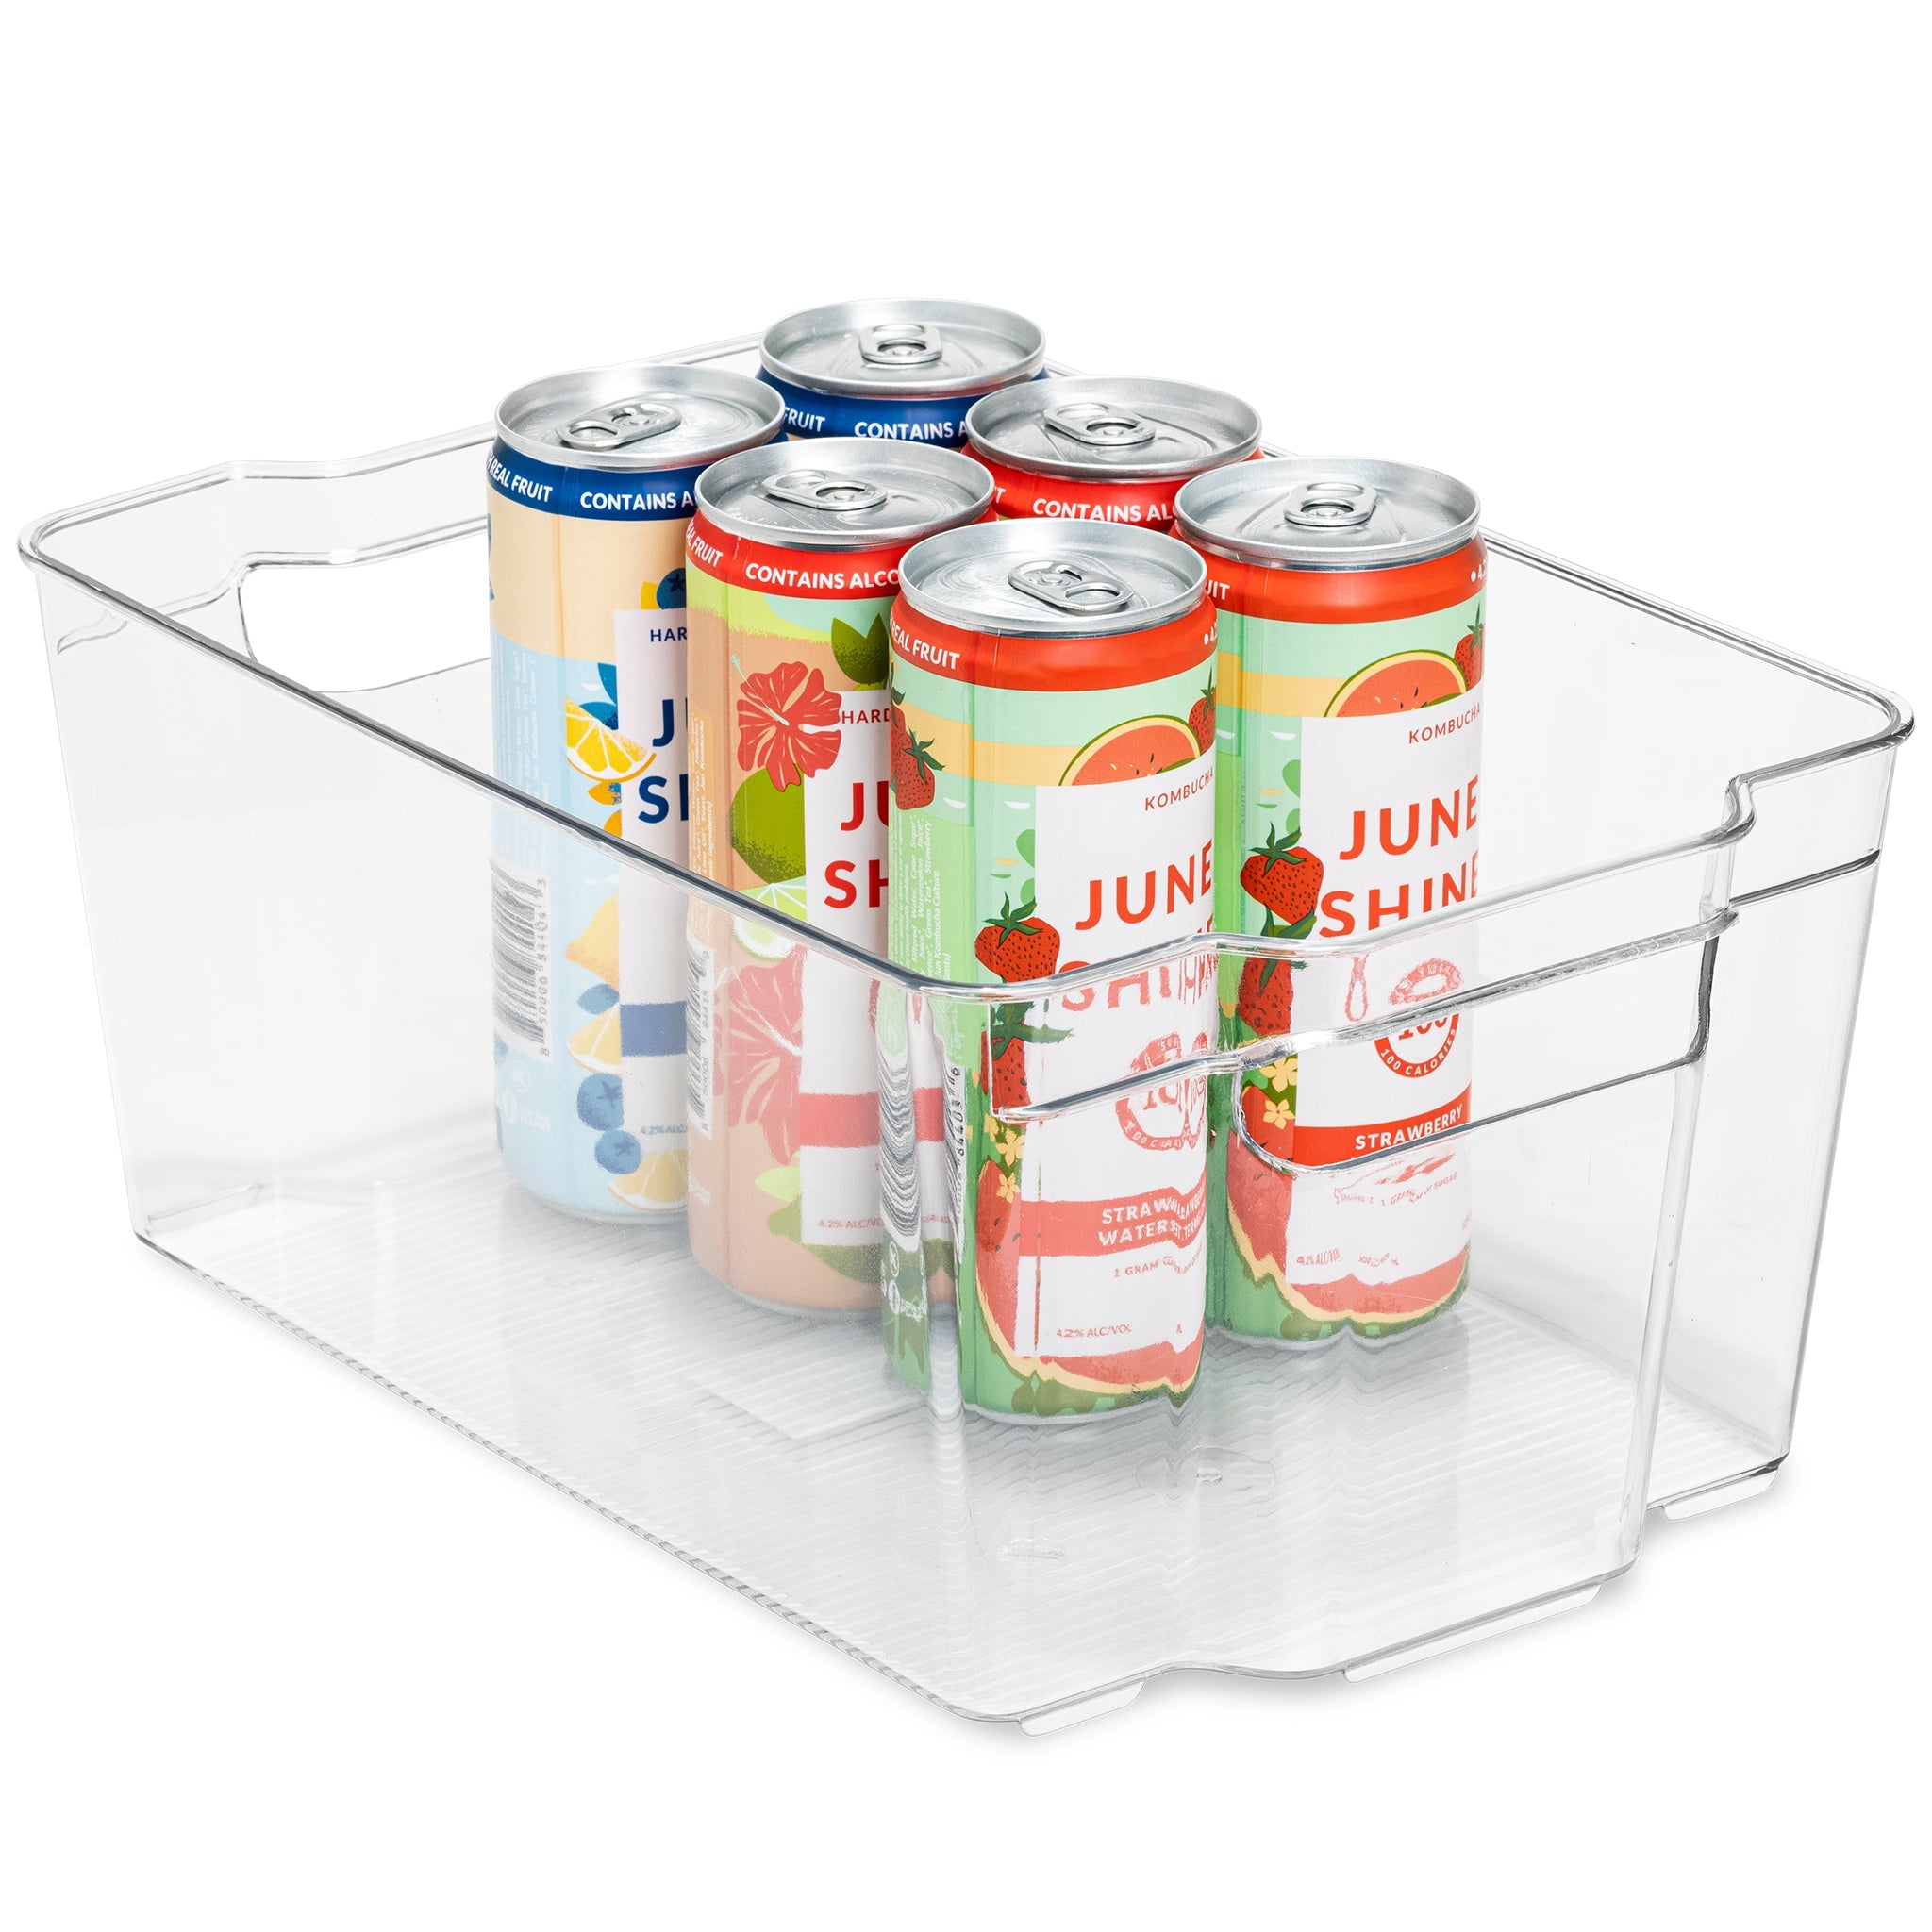 https://cdn.shopify.com/s/files/1/2393/7799/products/tall-stackable-refrigerator-bin-with-handle-8-x-12-inch-smart-design-kitchen-8003381-incrementing-number-818529.jpg?v=1679335358